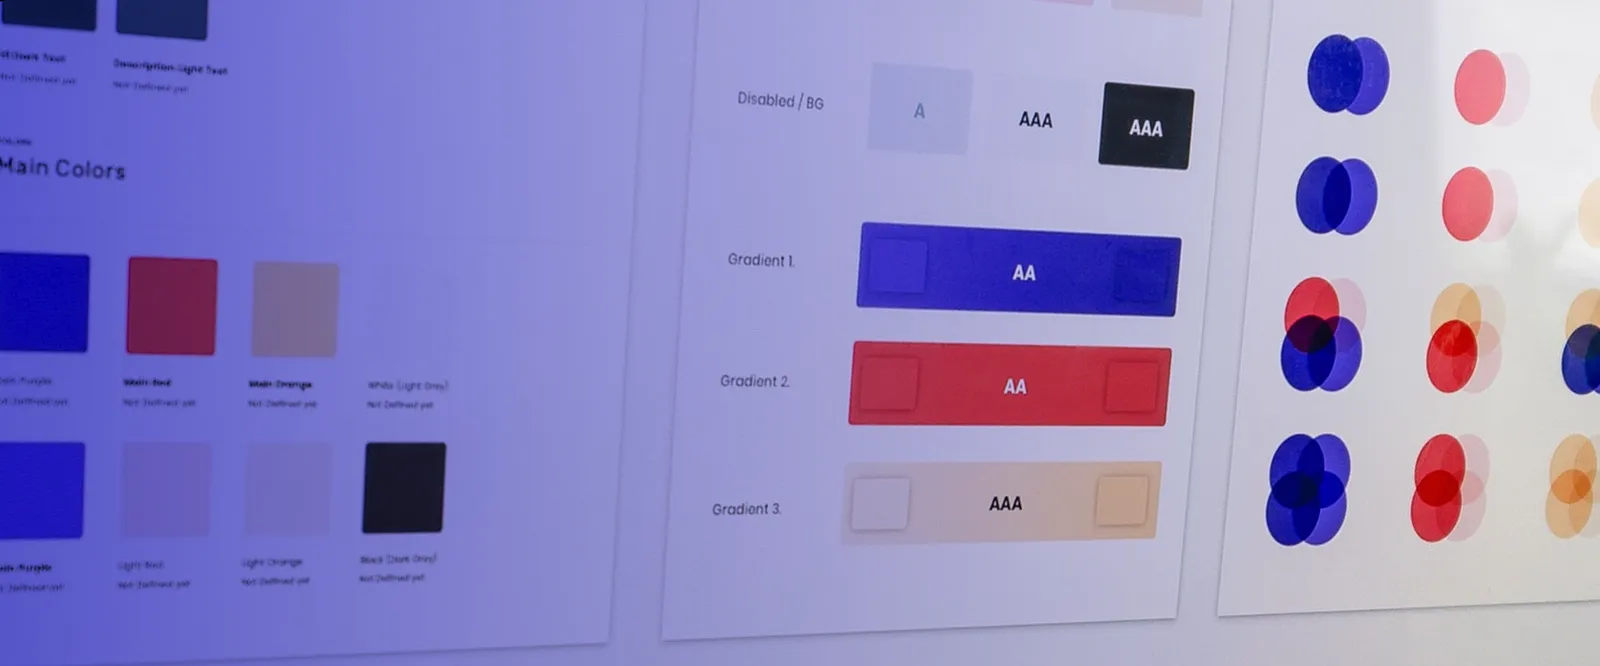 10 Best Design Systems You Must Know in 2020